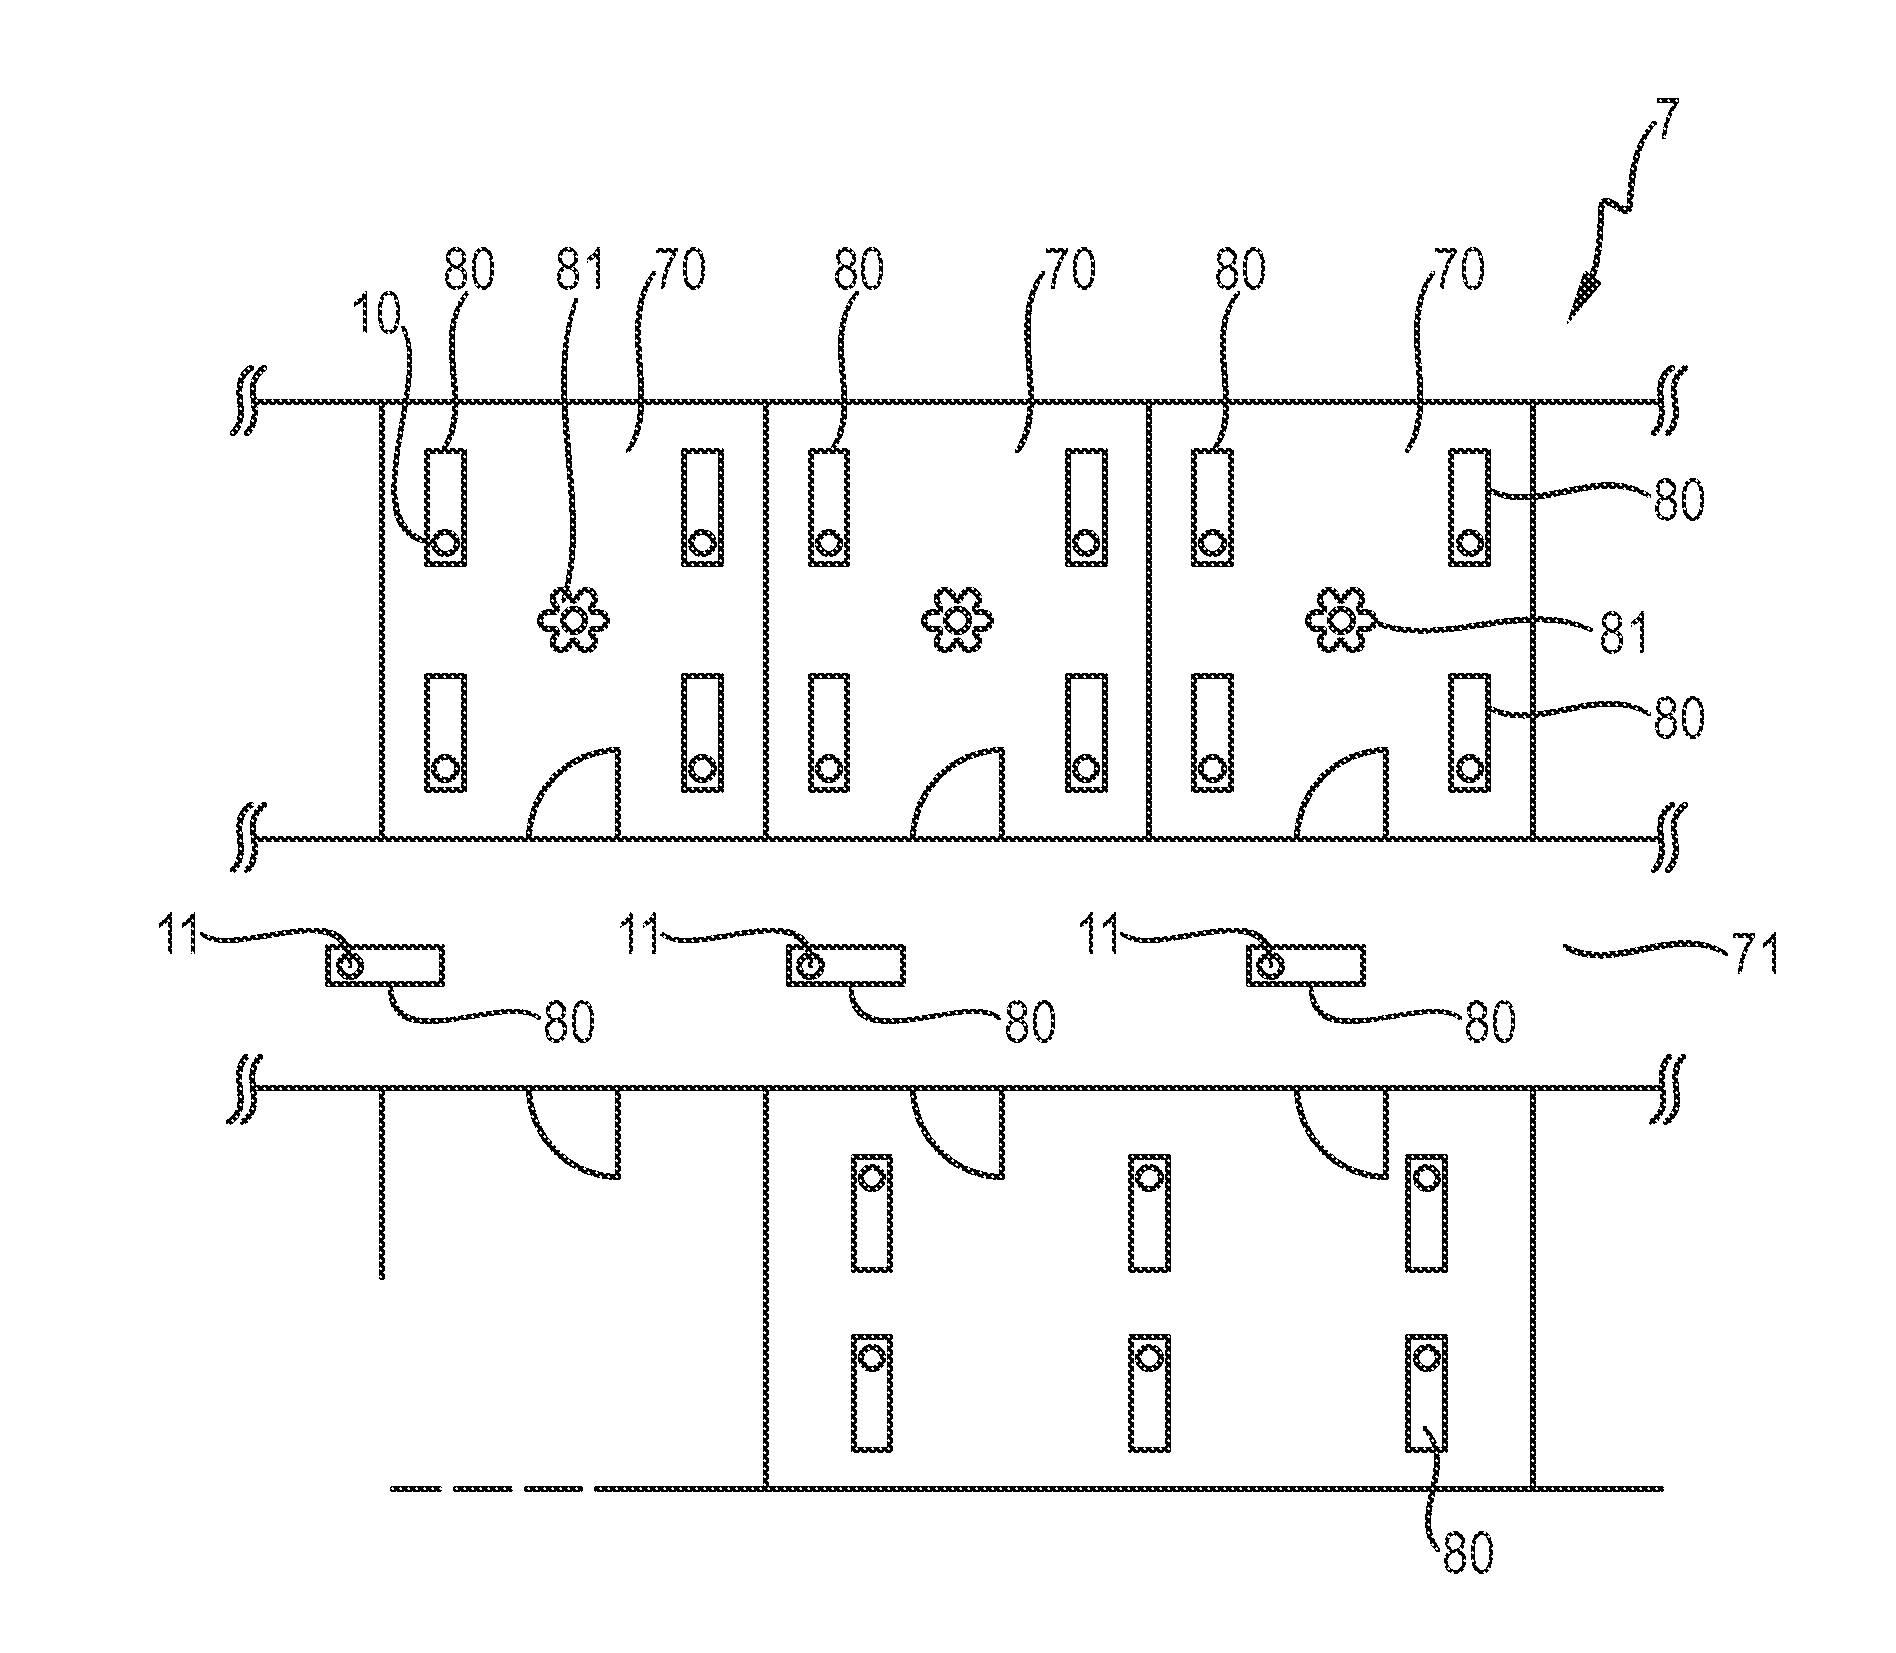 Method of performing automatic commissioning of a network